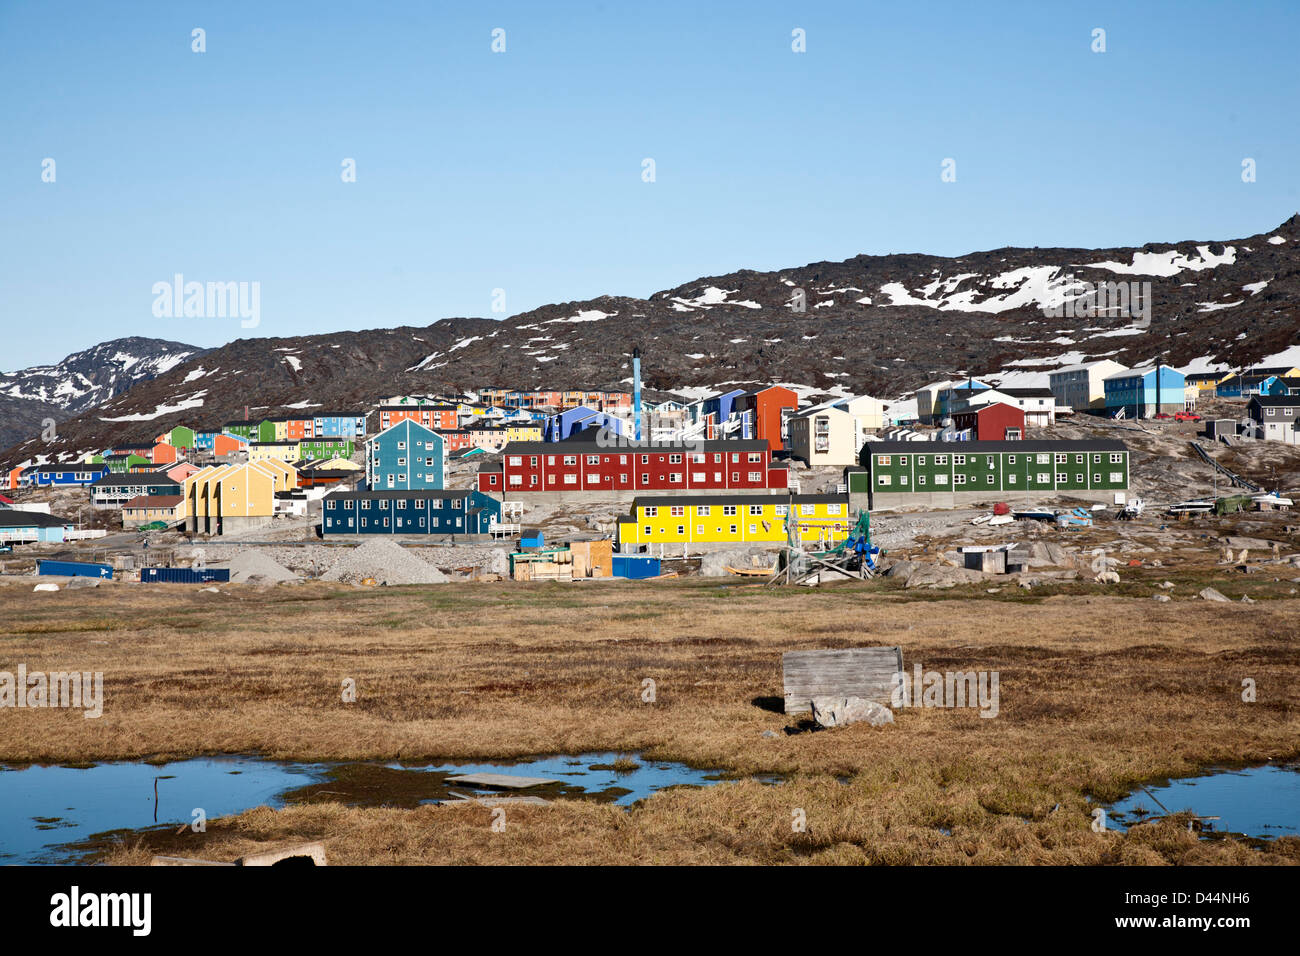 Apartment houses in Ilulissat, Greenland Stock Photo